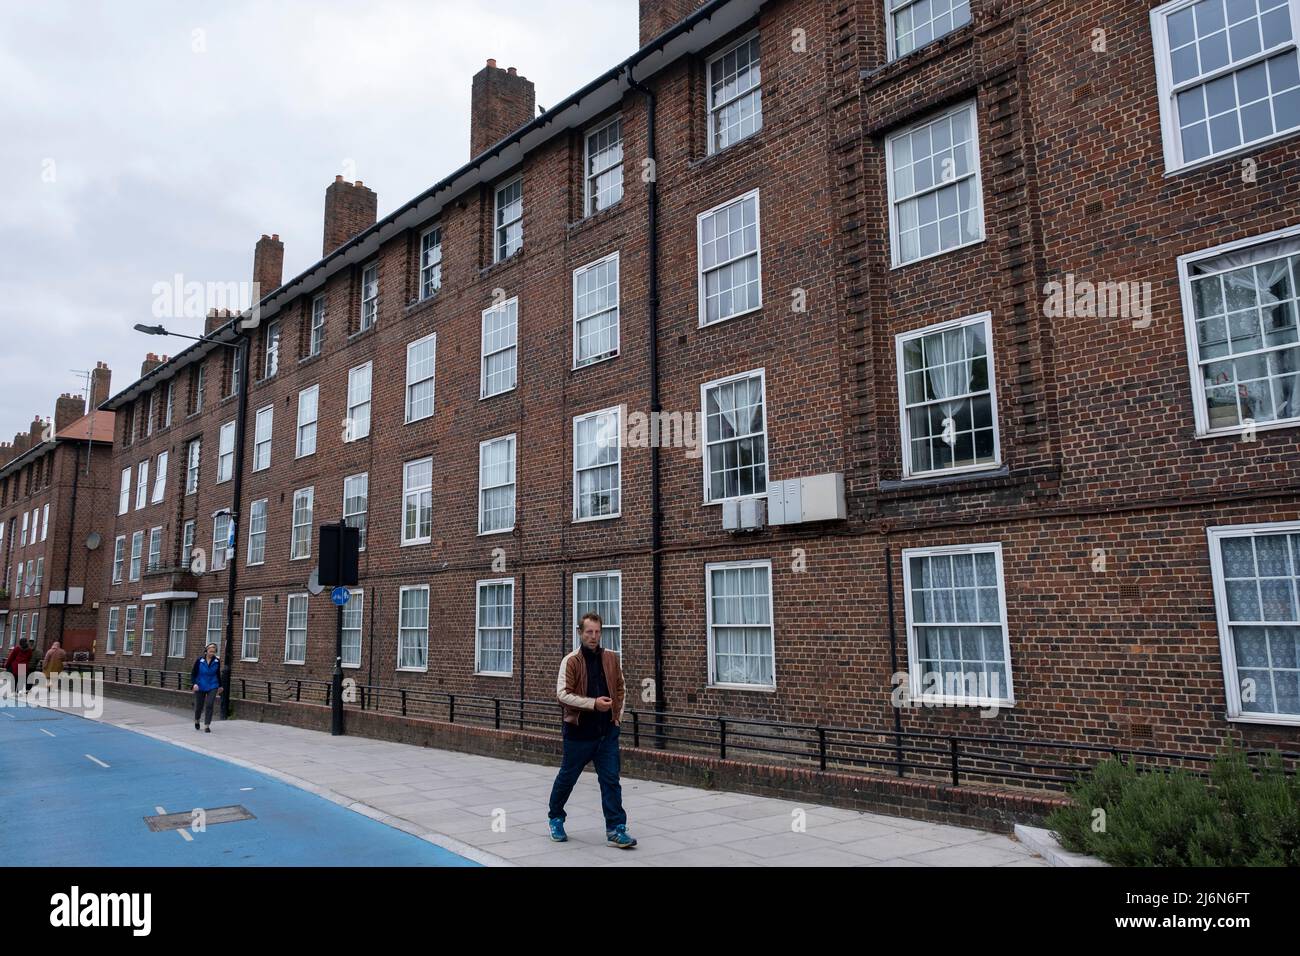 Social housing block in Shadwell on 27th April 2022 in London, United Kingdom. Council estates like this are very common all over the capital, and in particular in areas such as Tower Hamlets which is the most densely populated area in the London. Stock Photo